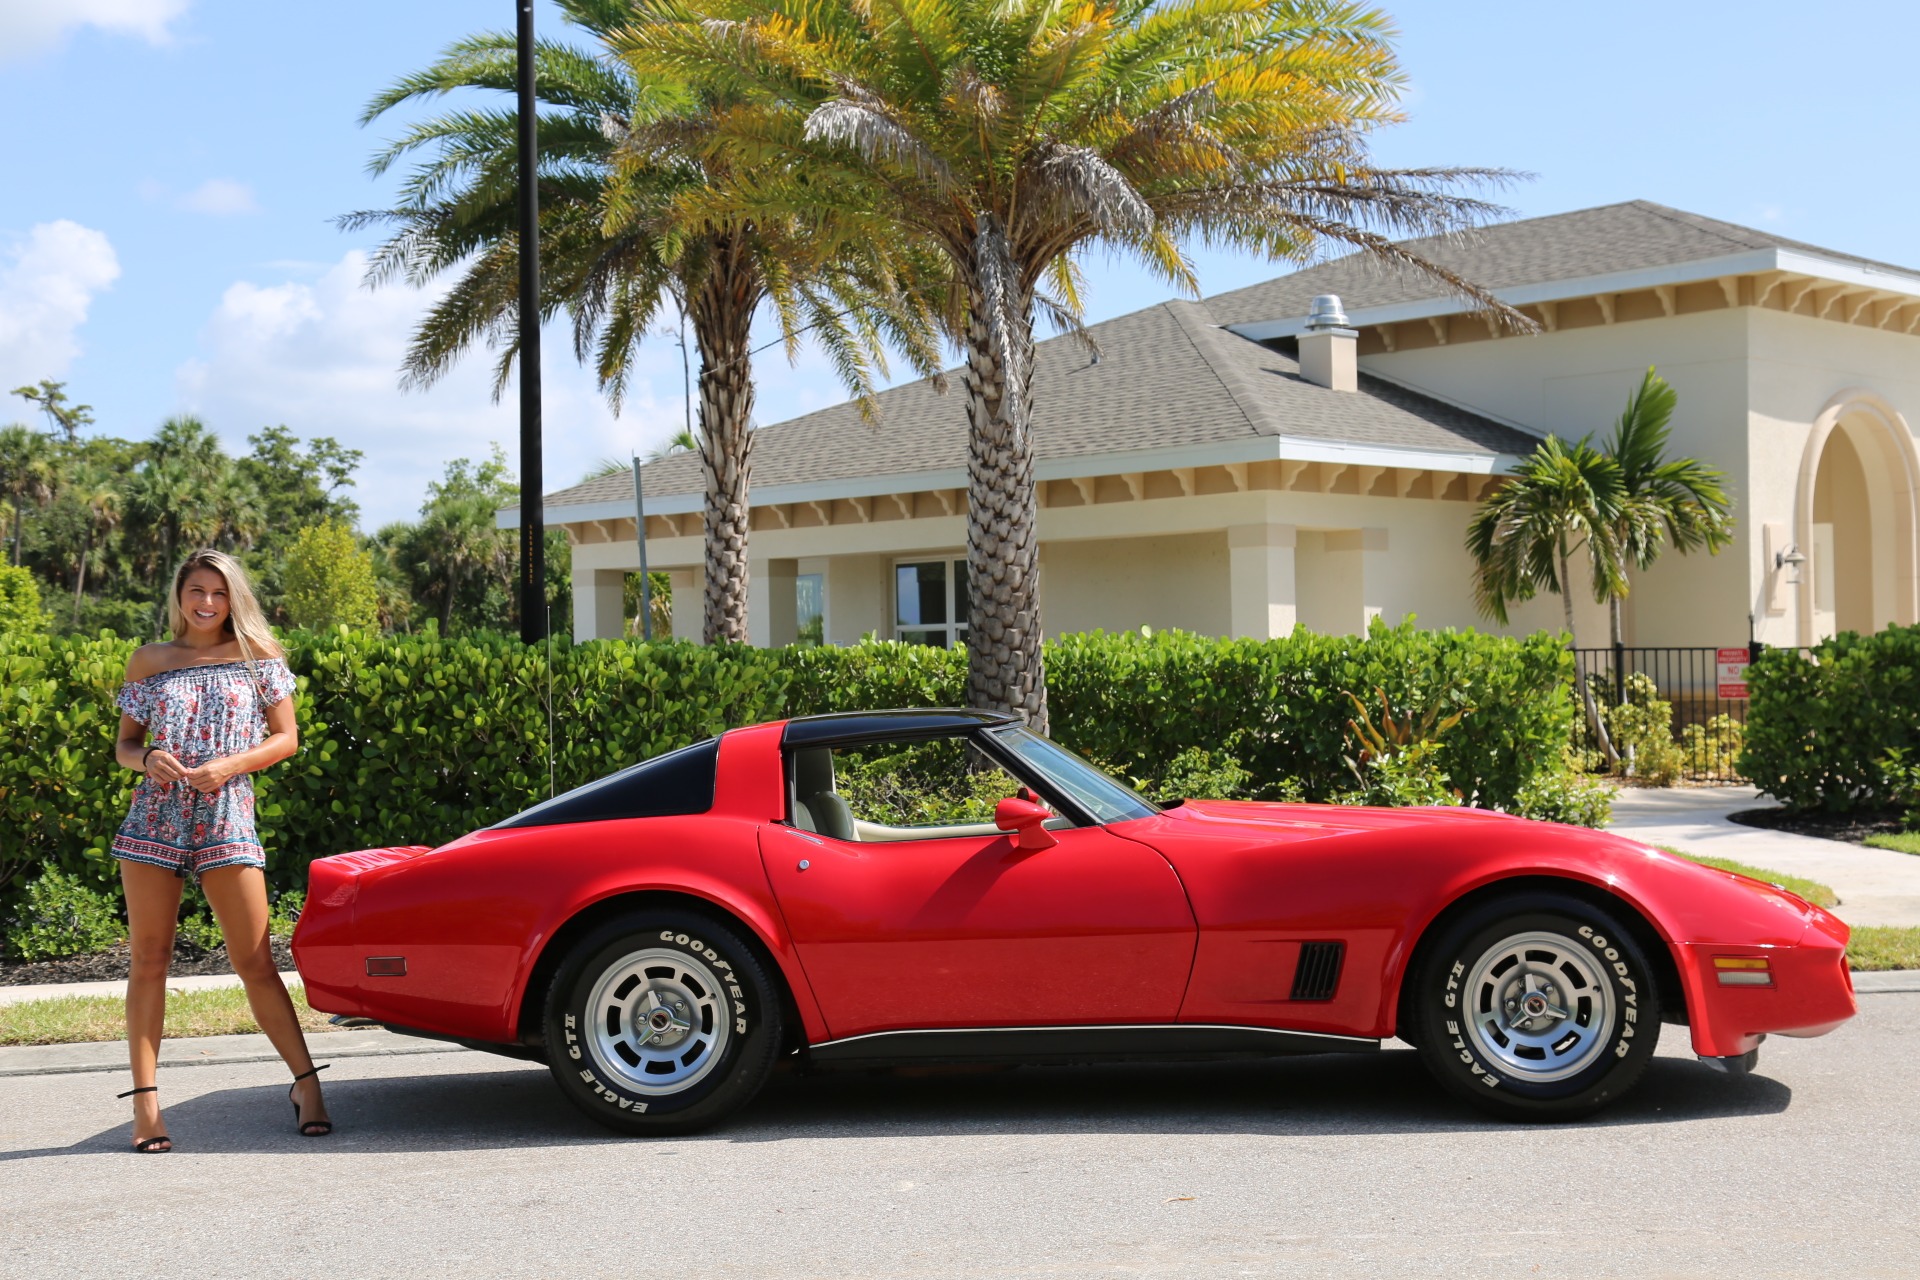 Used 1980 Chevy Corvette T Top Corvette for sale Sold at Muscle Cars for Sale Inc. in Fort Myers FL 33912 2